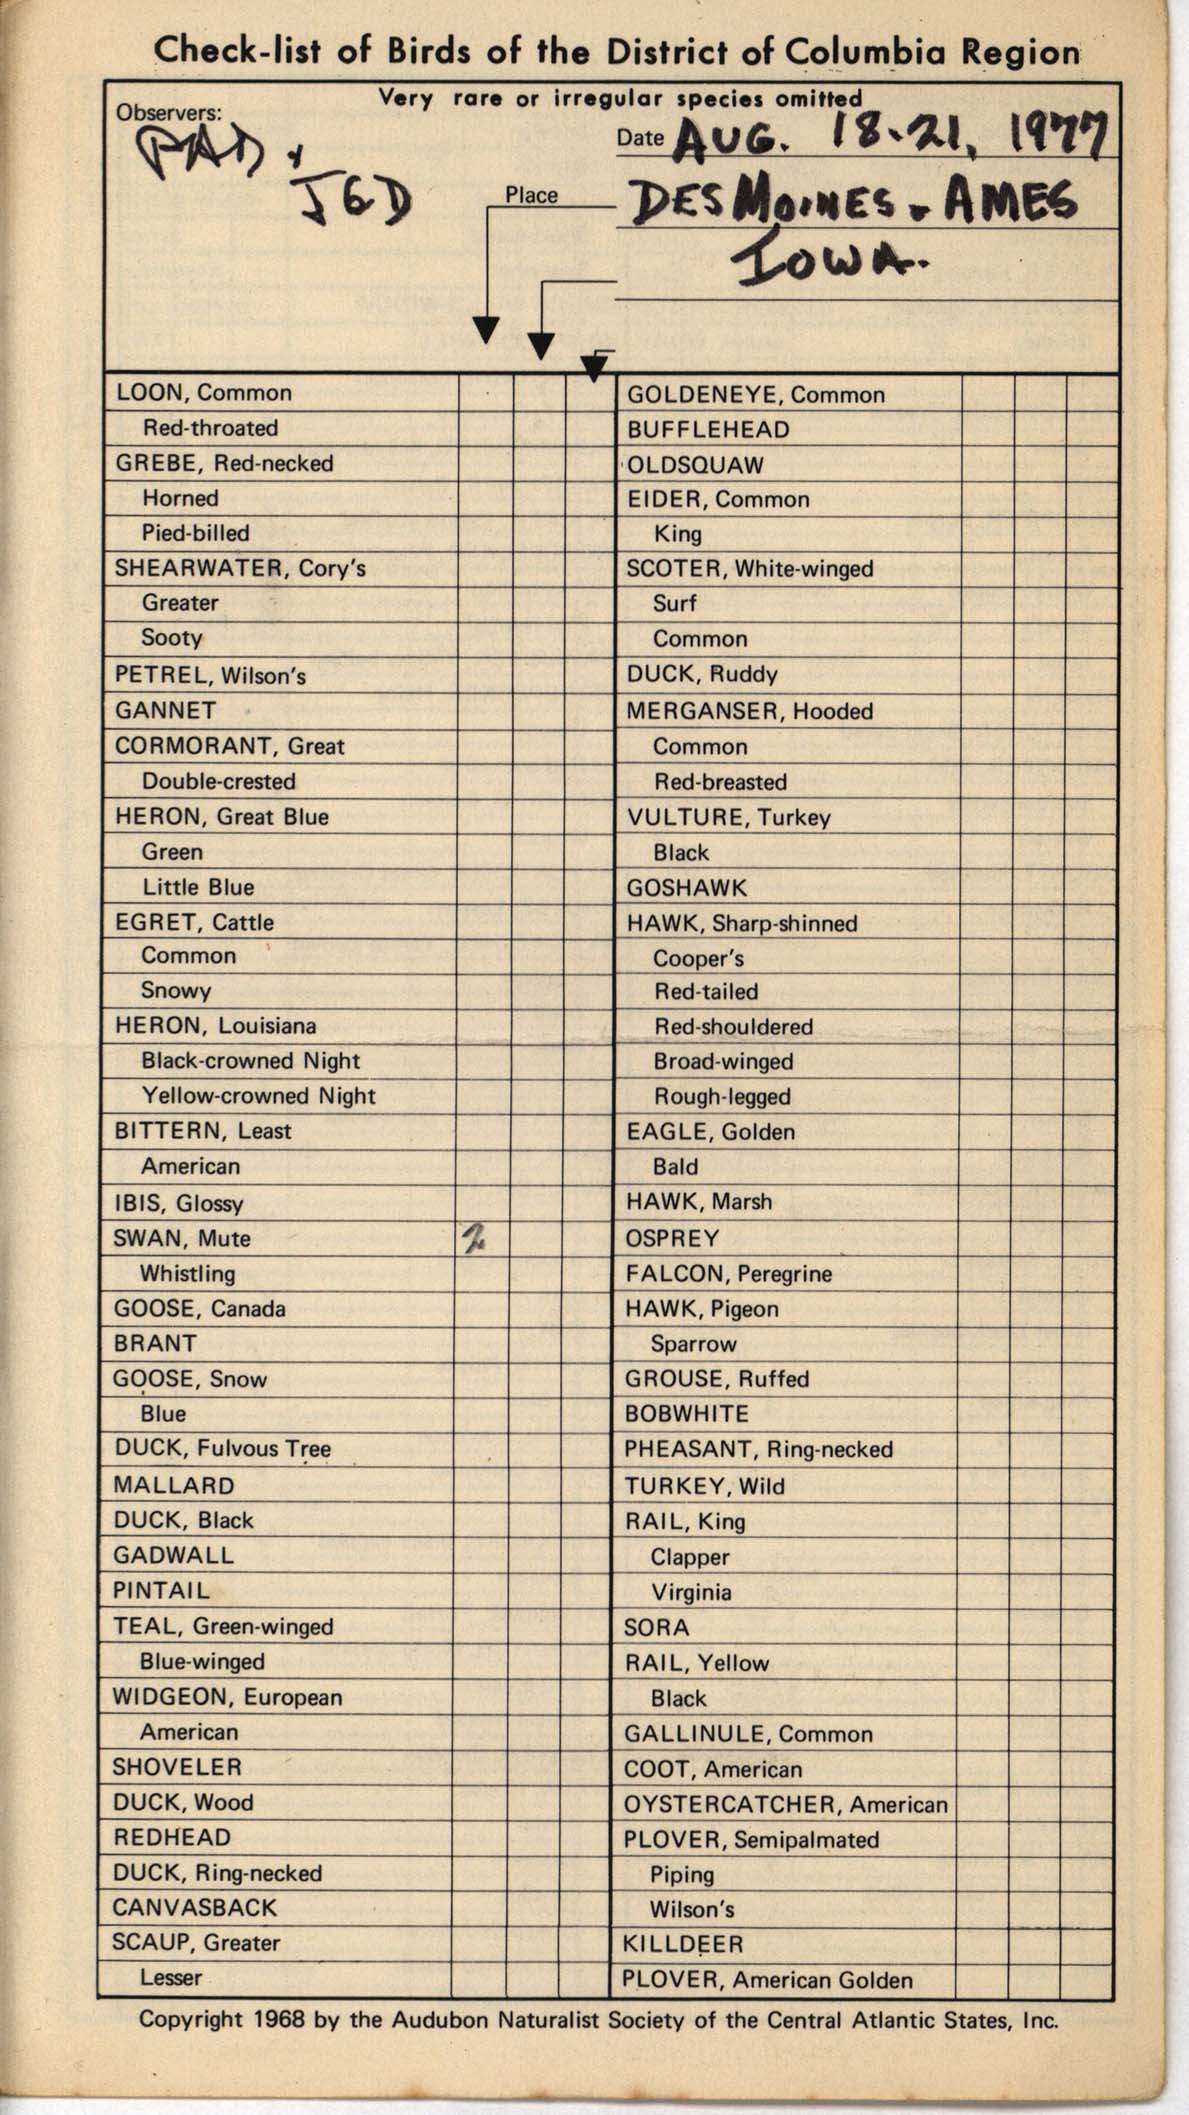 Check-list of birds, Philip DuMont, August 18 to 21, 1977